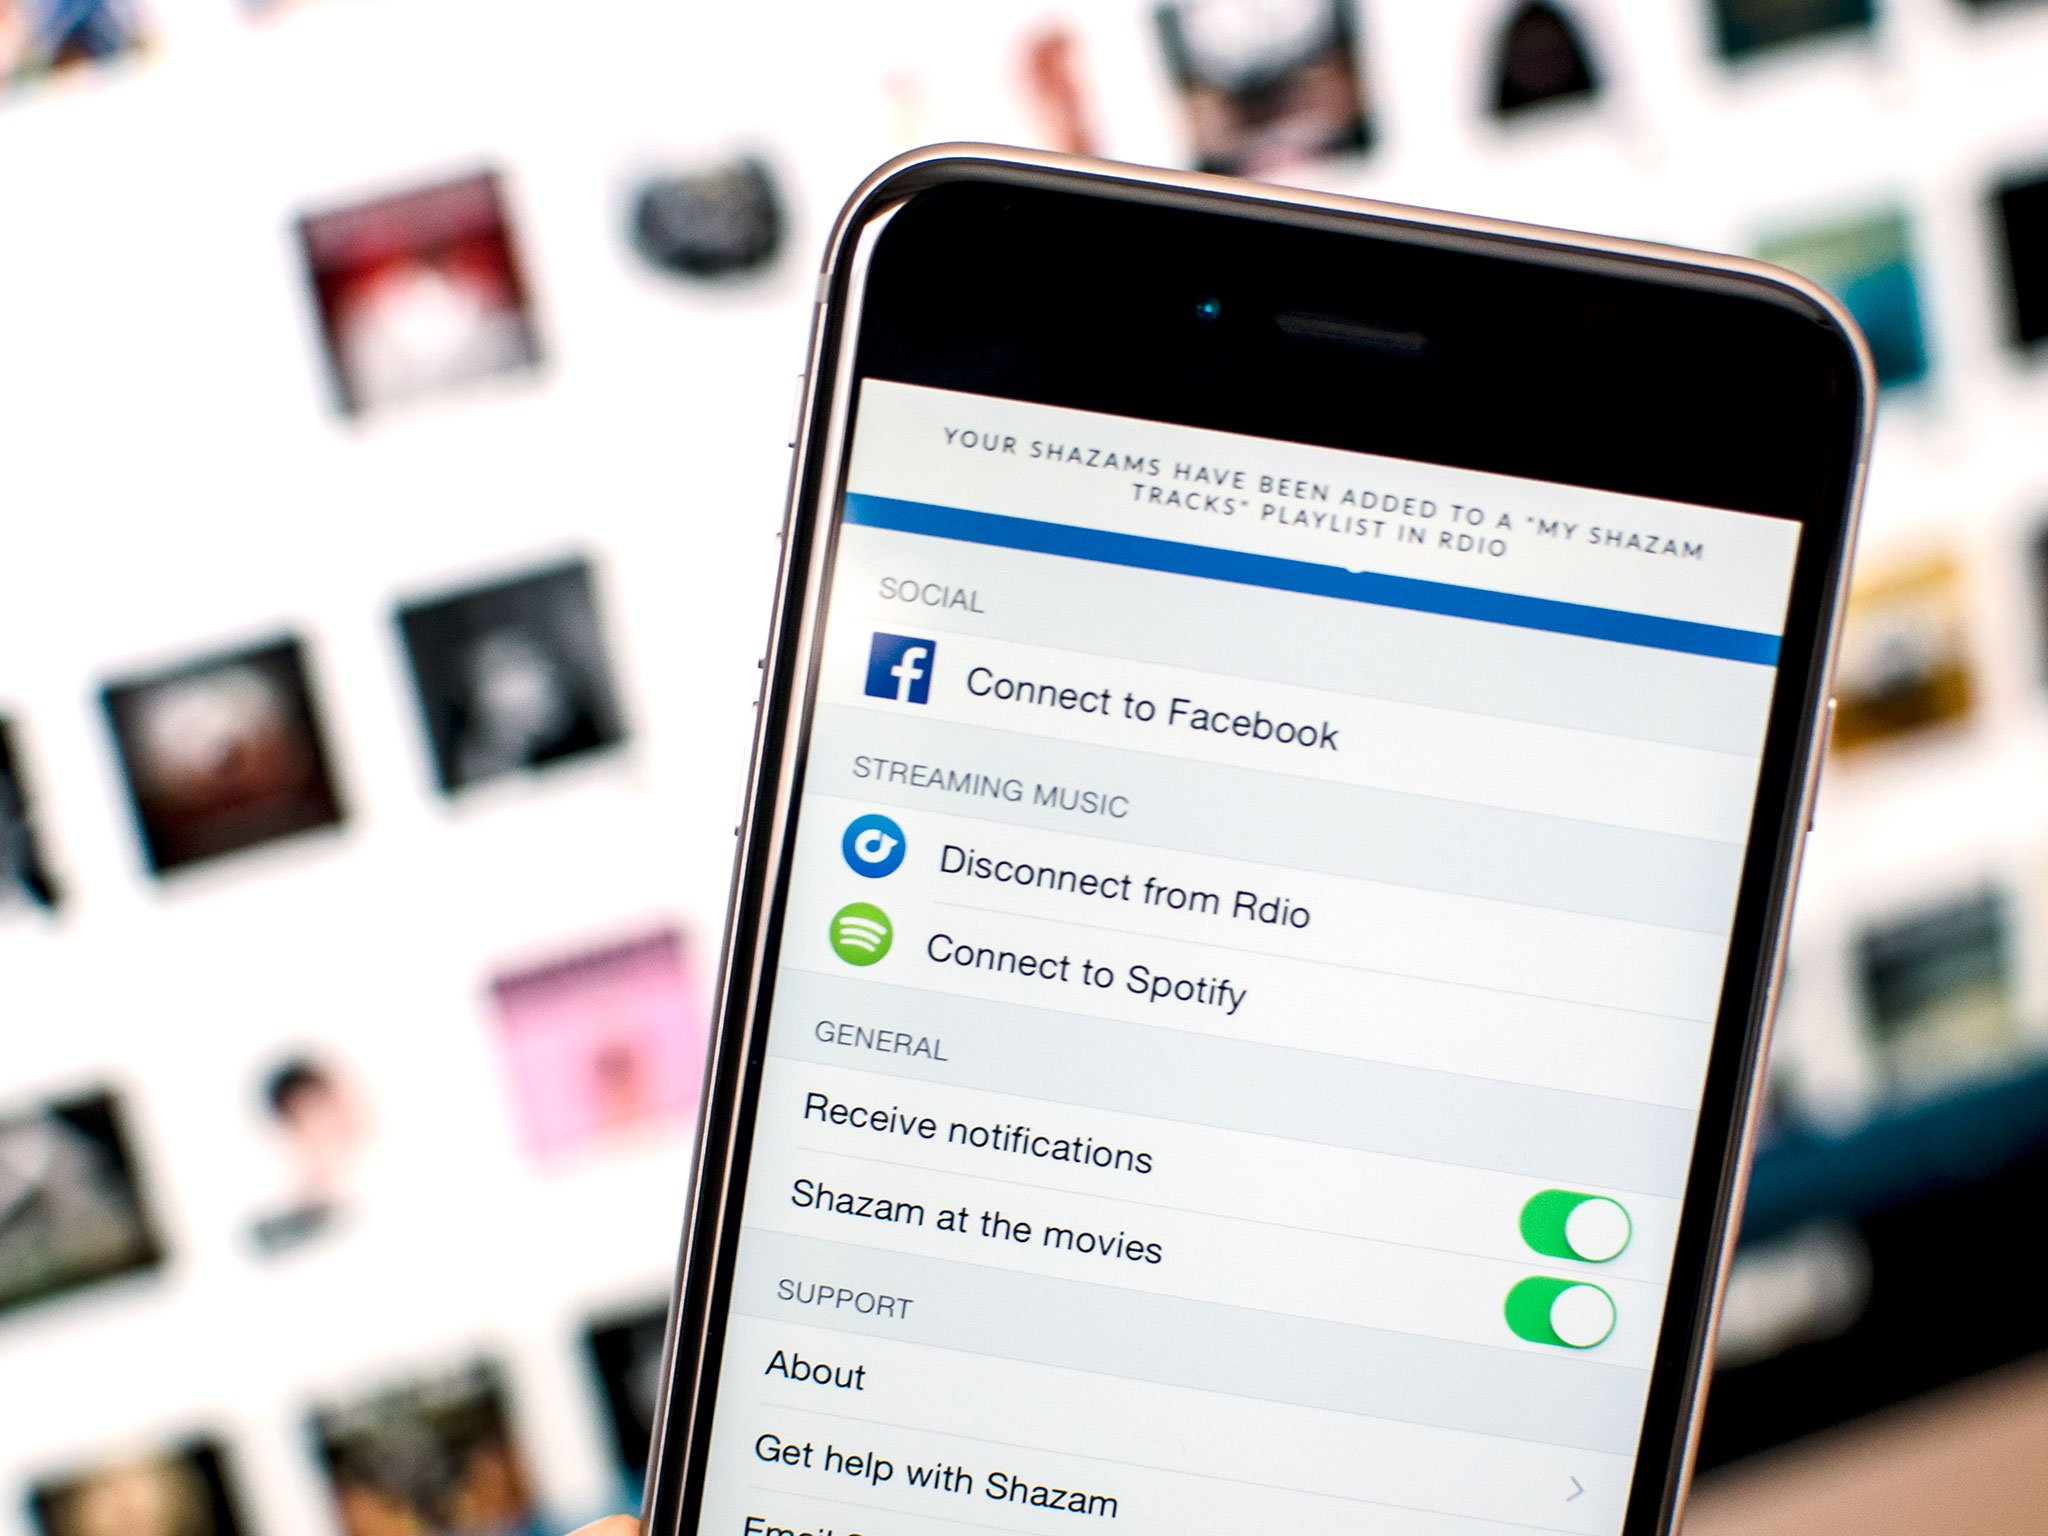 How to instantly turn your Shazam tags into an Rdio or Spotify playlist